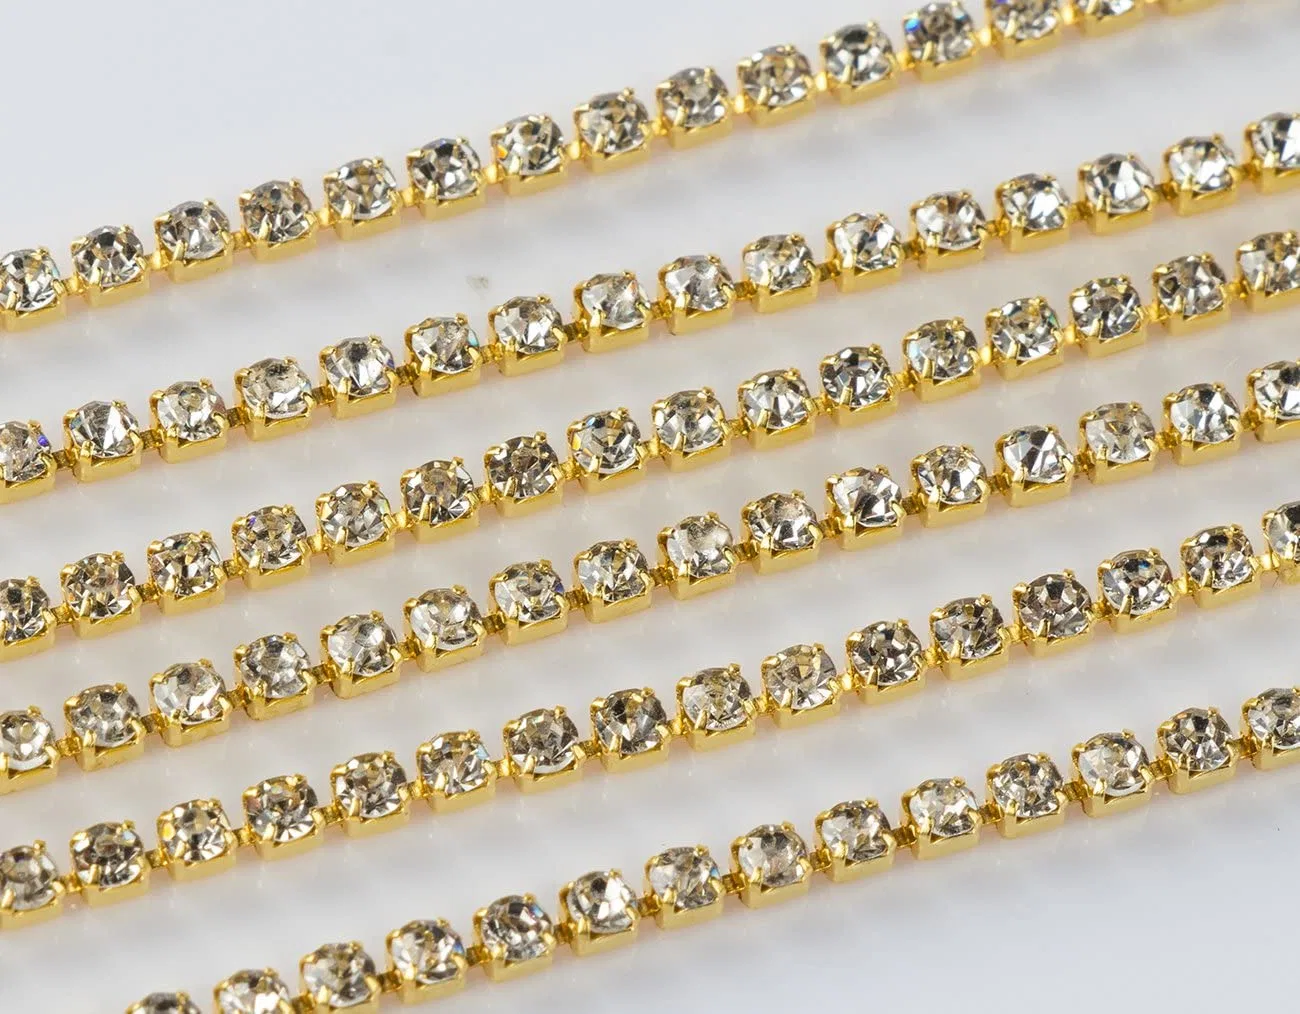 Wholesale/Supplier Gold 2.0mm Width Rhinestone Dainty Body Chain Shining Necklace Non Allergic Stainless Steel Accessories for Ladies' Clothes Body Chain Jewelry Making